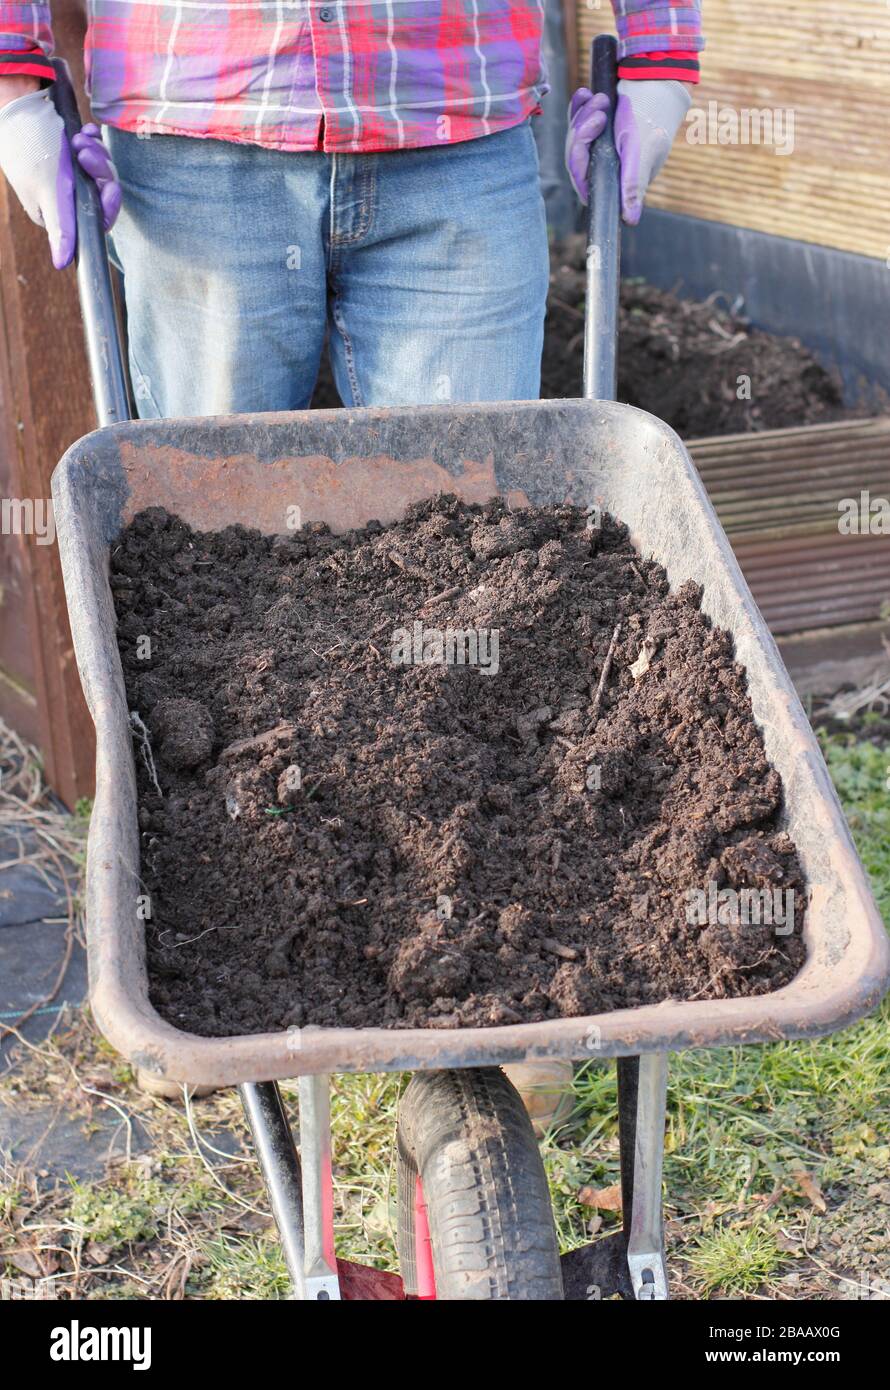 Homemade compost from vegetable scraps, cardboard, grass clippings and other biodegradable waste, in a wheelbarrow by composting area. UK garden Stock Photo